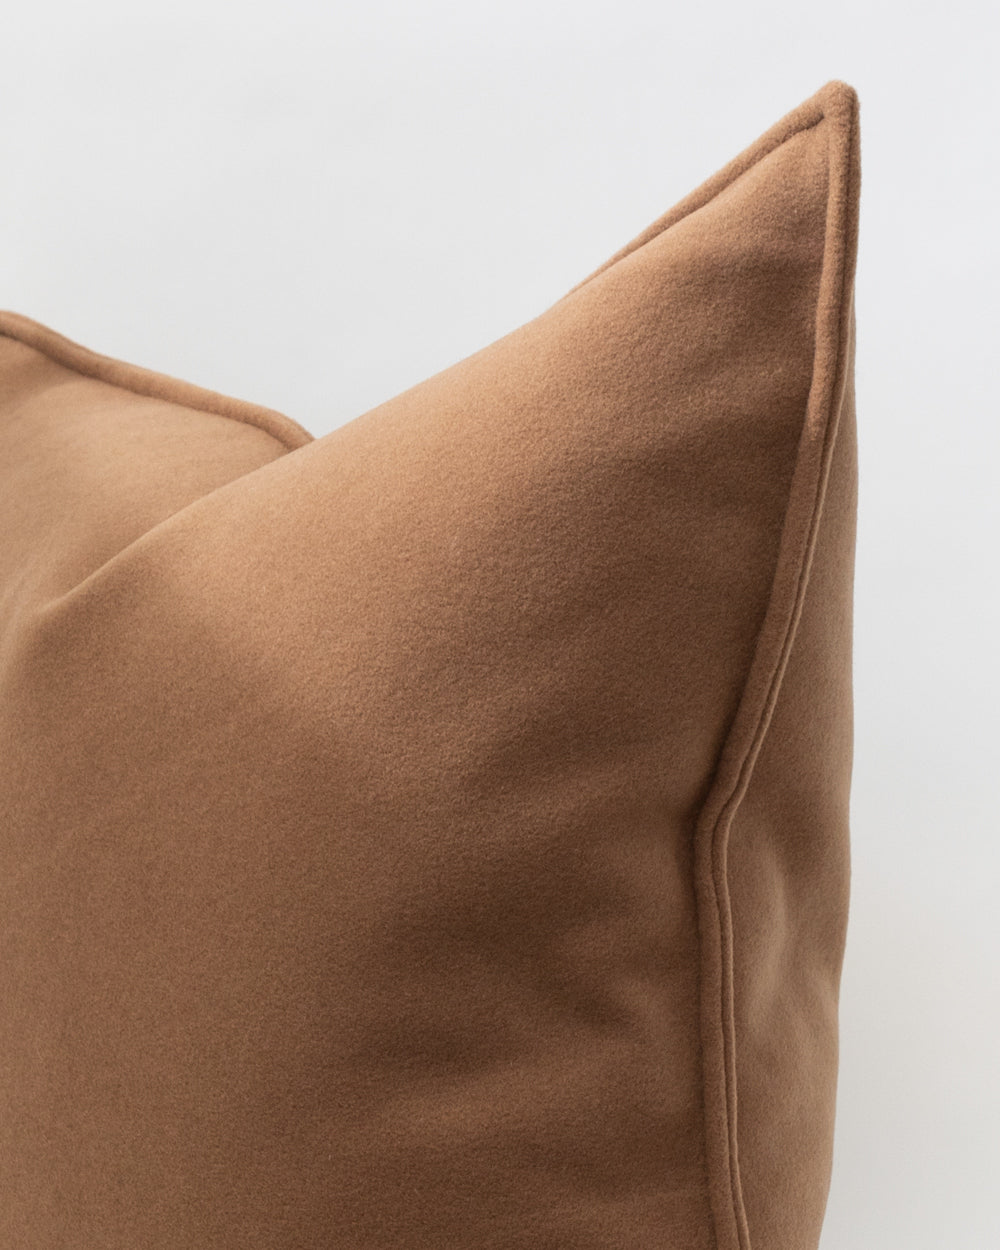 Harris Cashmere Wool Pillow Cover, Camel